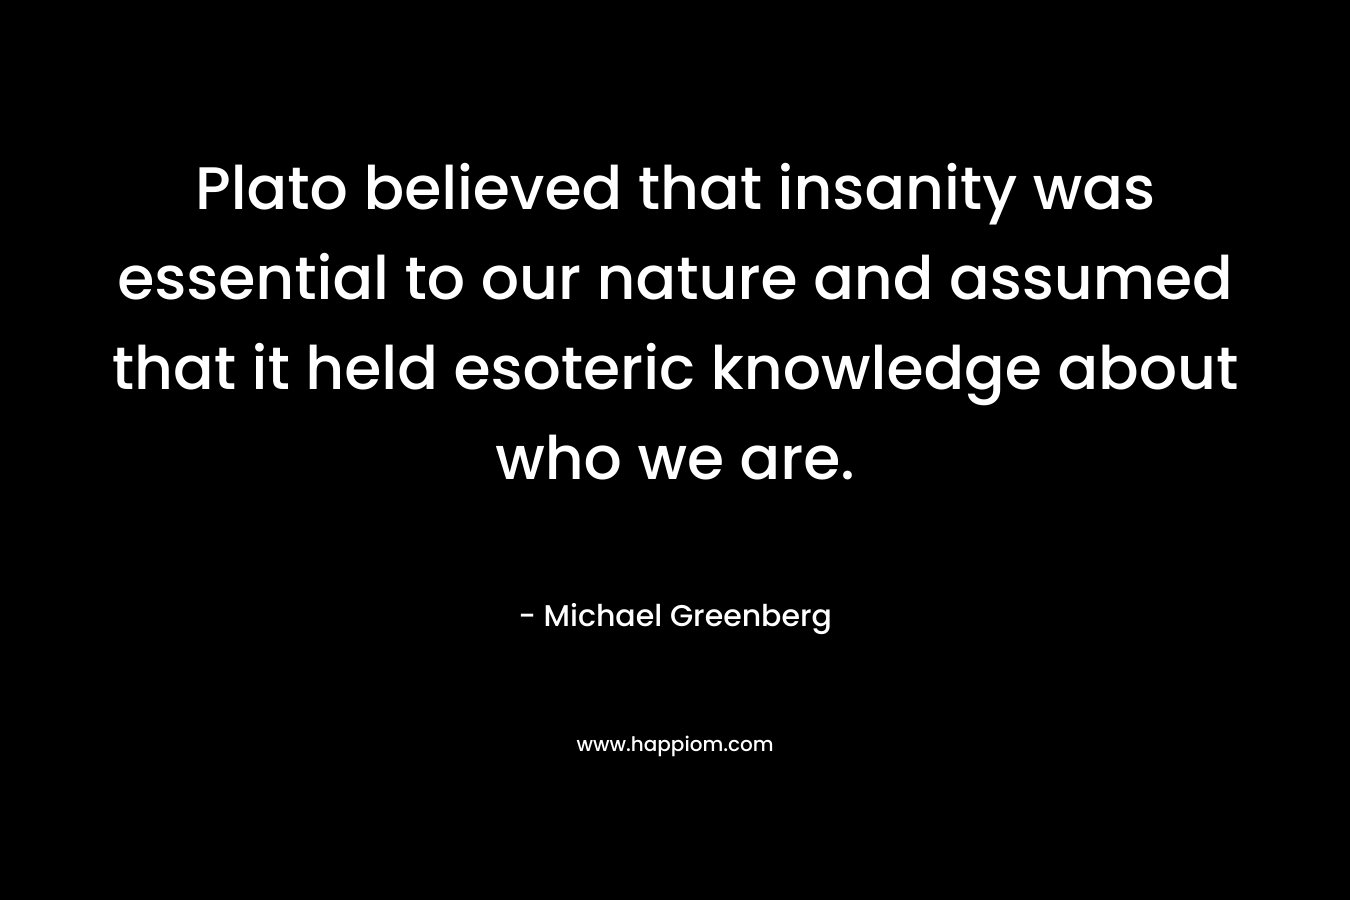 Plato believed that insanity was essential to our nature and assumed that it held esoteric knowledge about who we are.